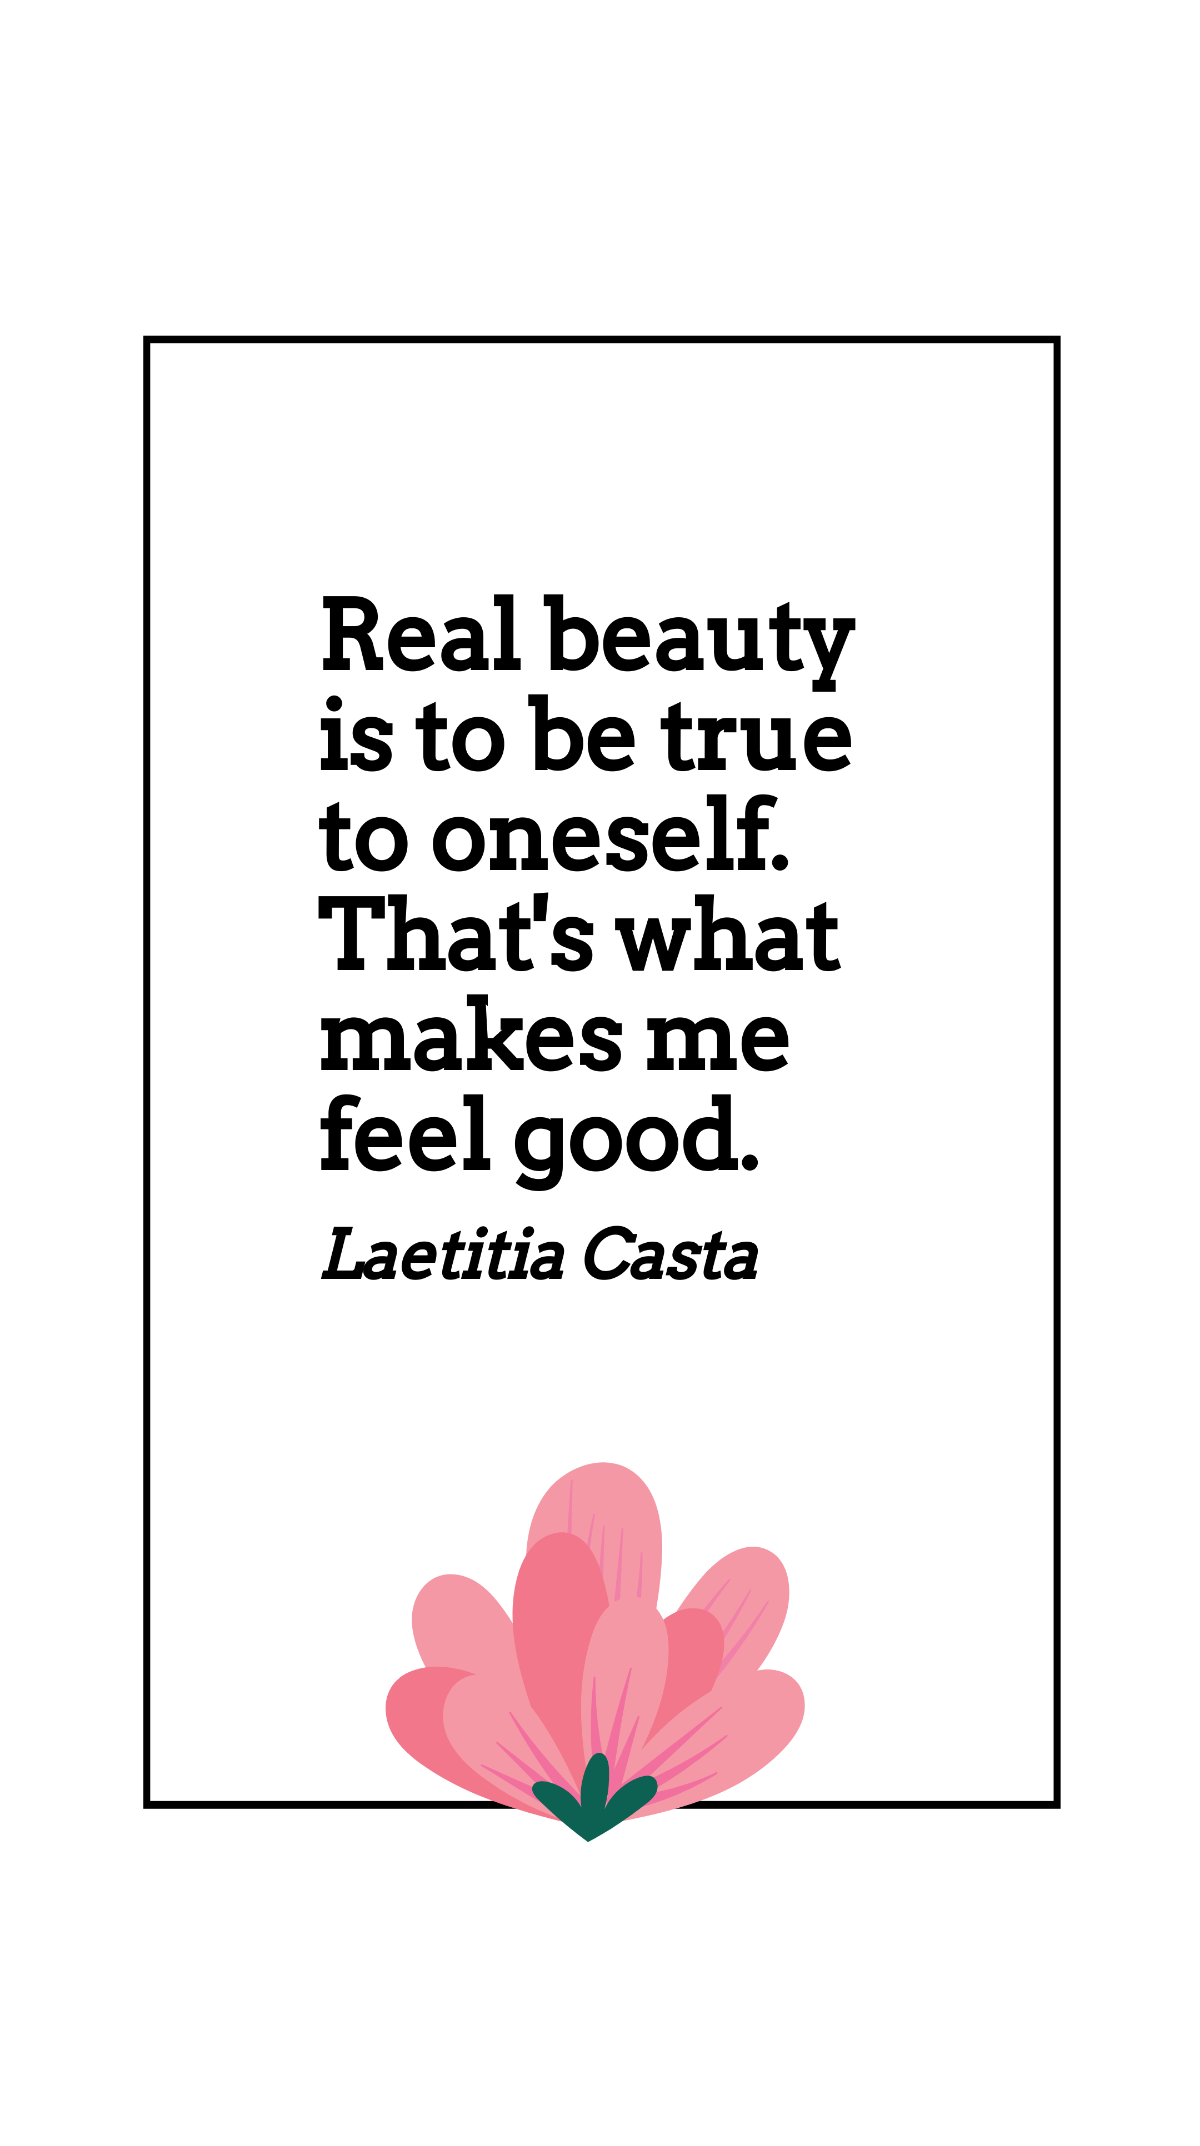 Laetitia Casta - Real beauty is to be true to oneself. That's what makes me feel good. Template